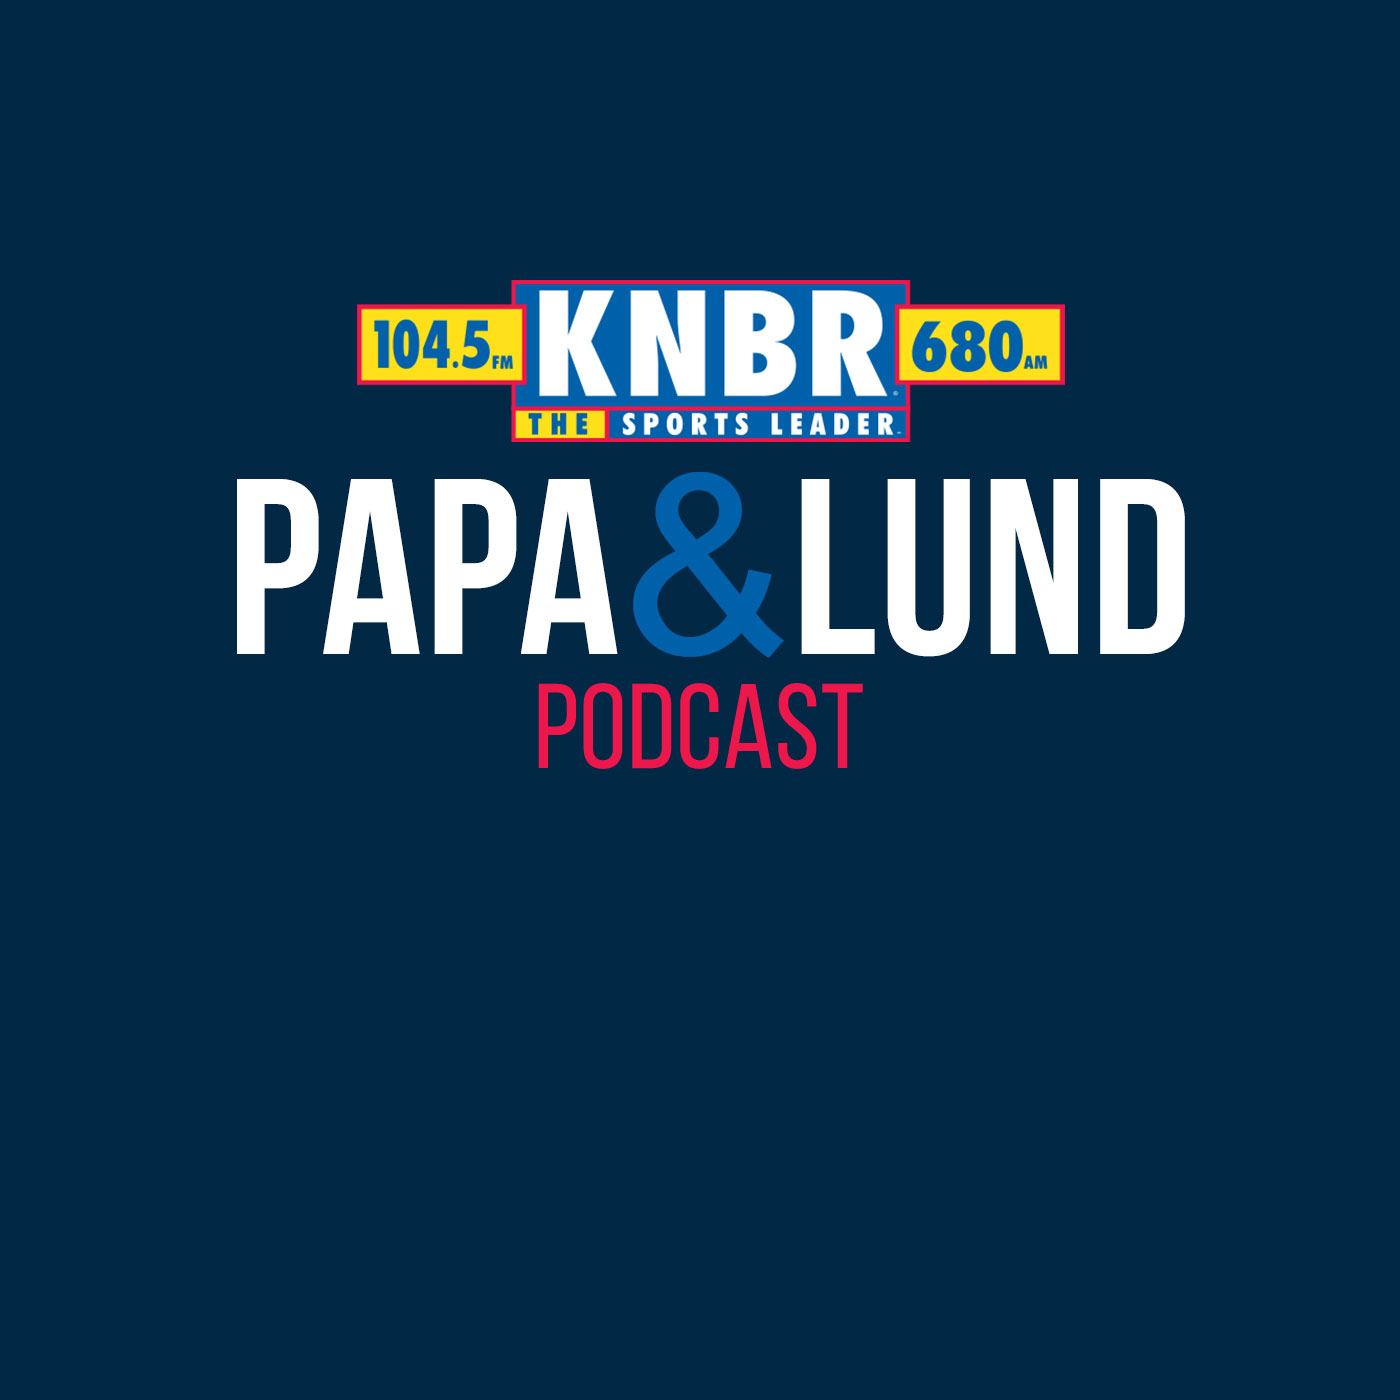 2-10 Jim McMahon and Kyle Turley join Papa & Lund at Radio Row to preview Super Bowl LVI